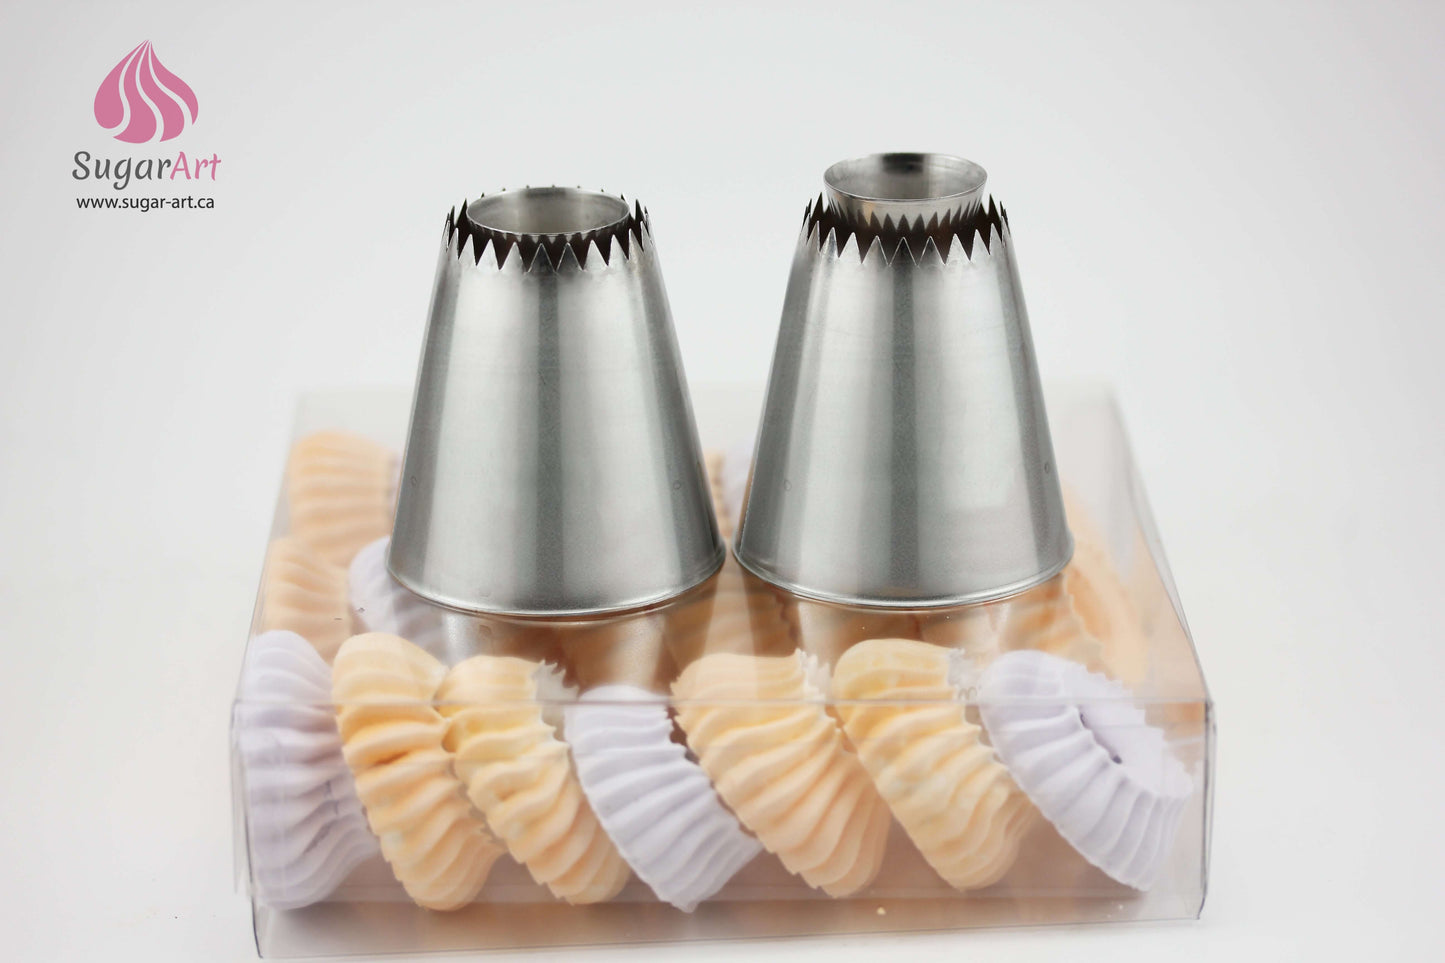 "Sultane" Piping Nozzle Set of 2 (Closed + Open)-Piping Tips-Sugar Art